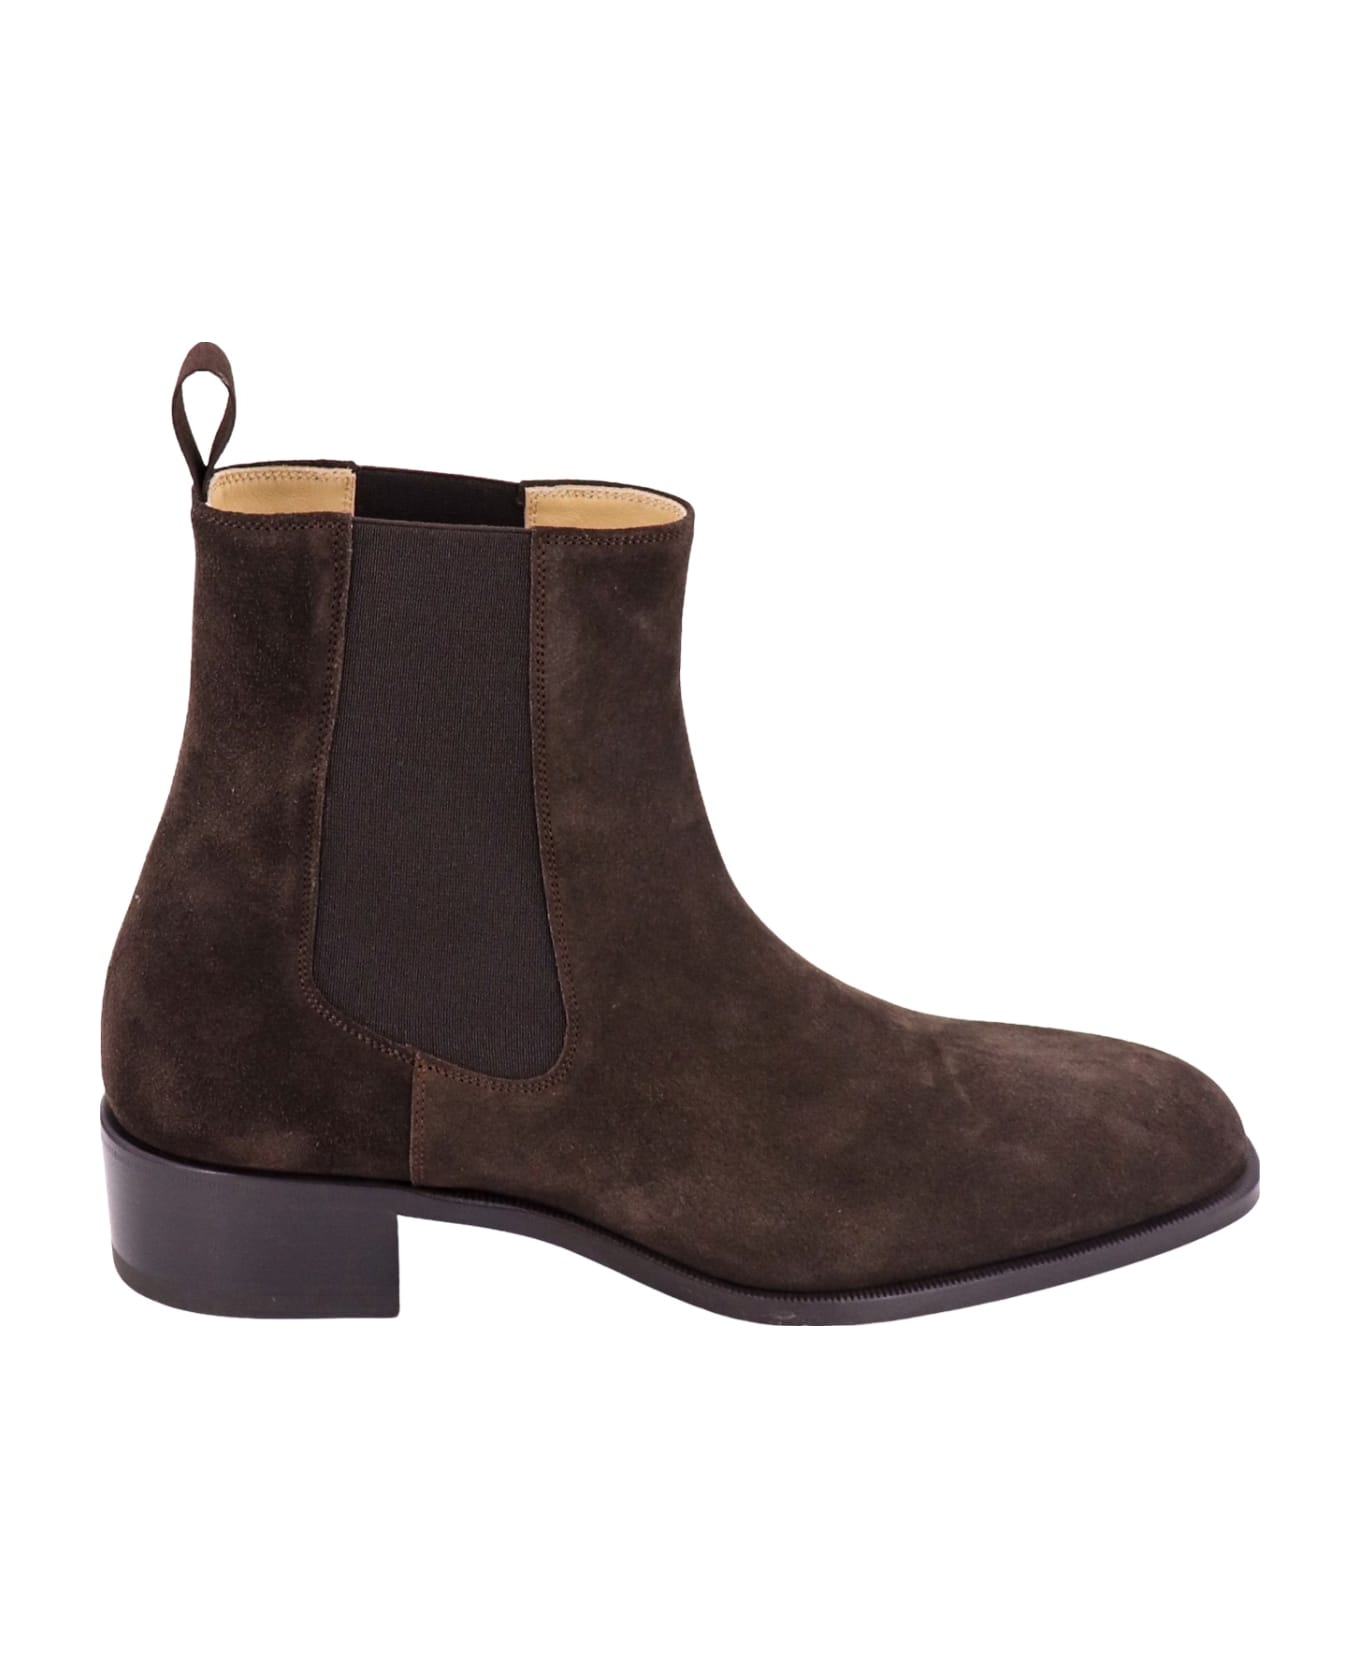 Tom Ford Boots - Brown